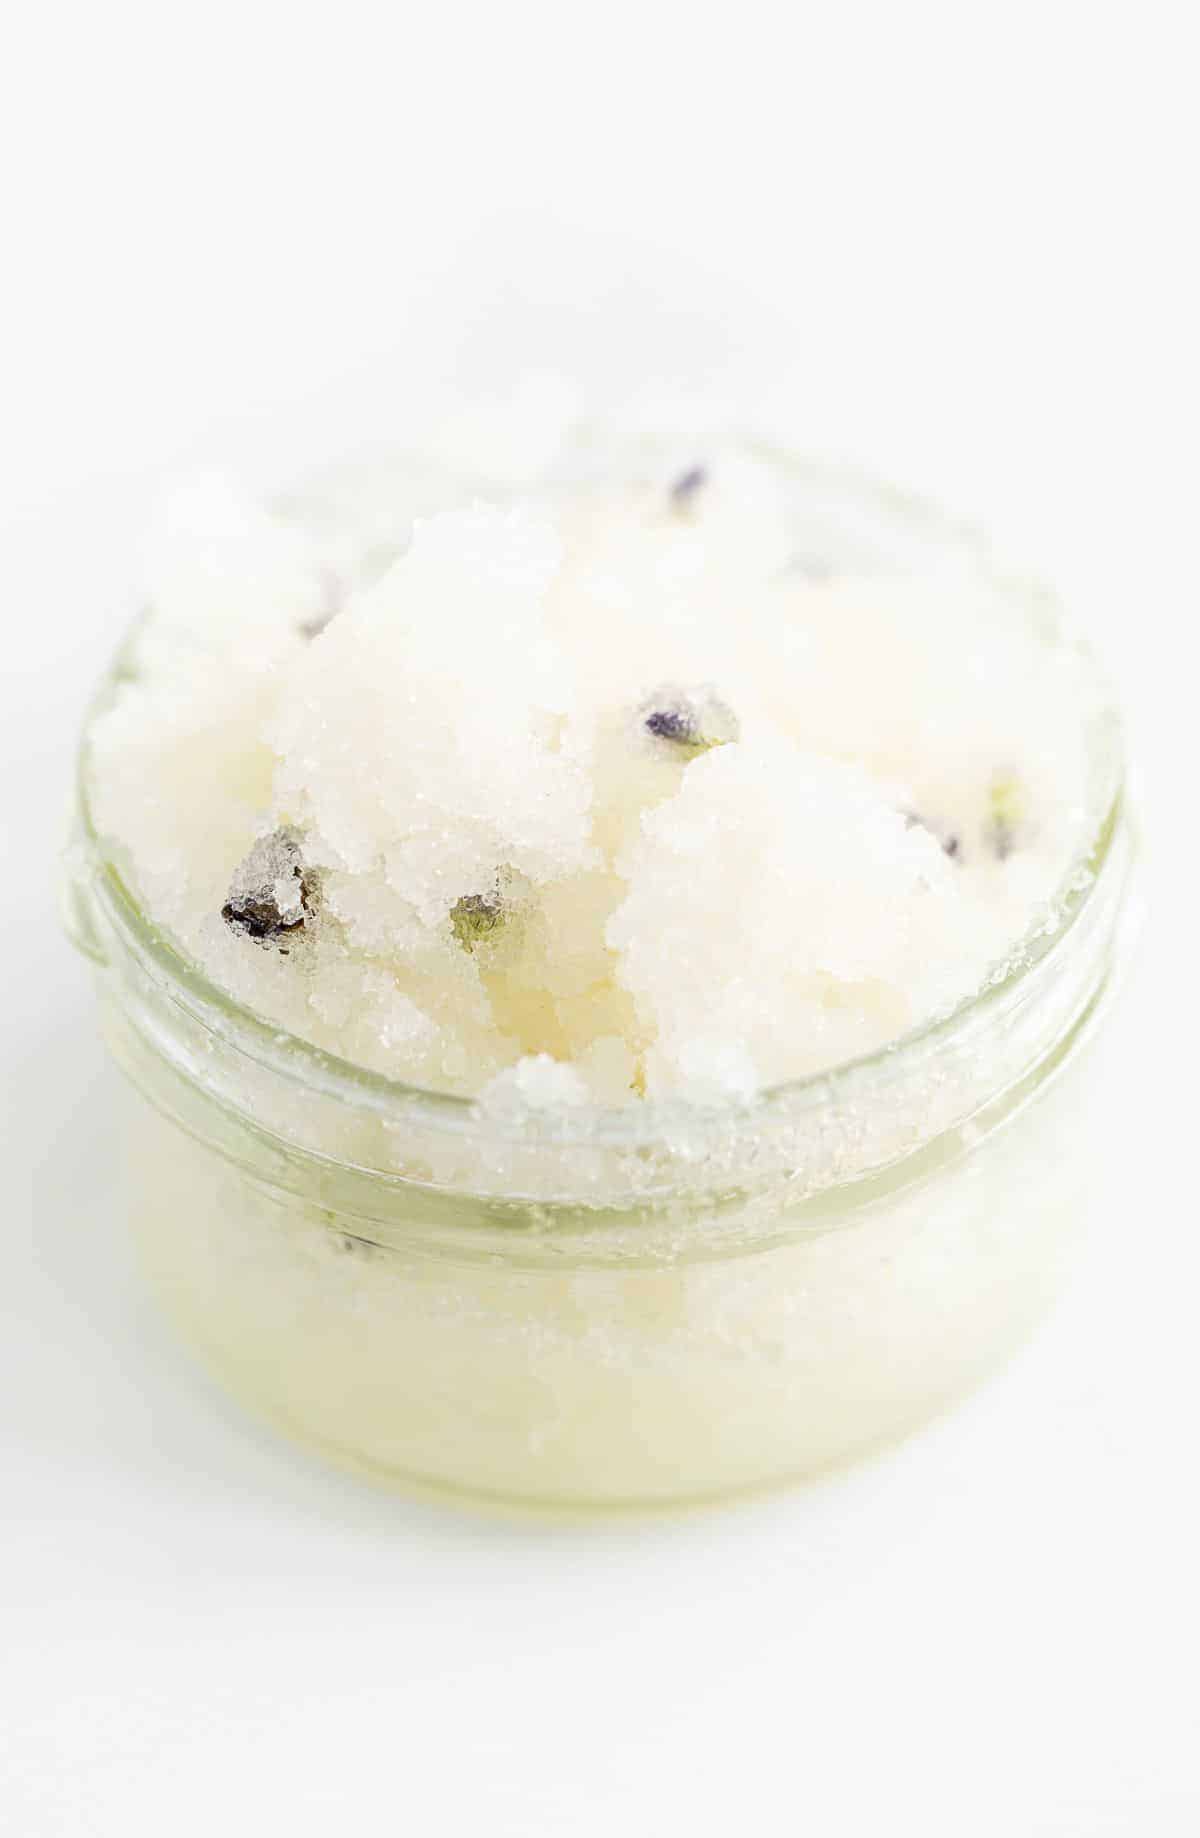 A homemade sugar scrub with lavender, in a glass jar on a white surface.